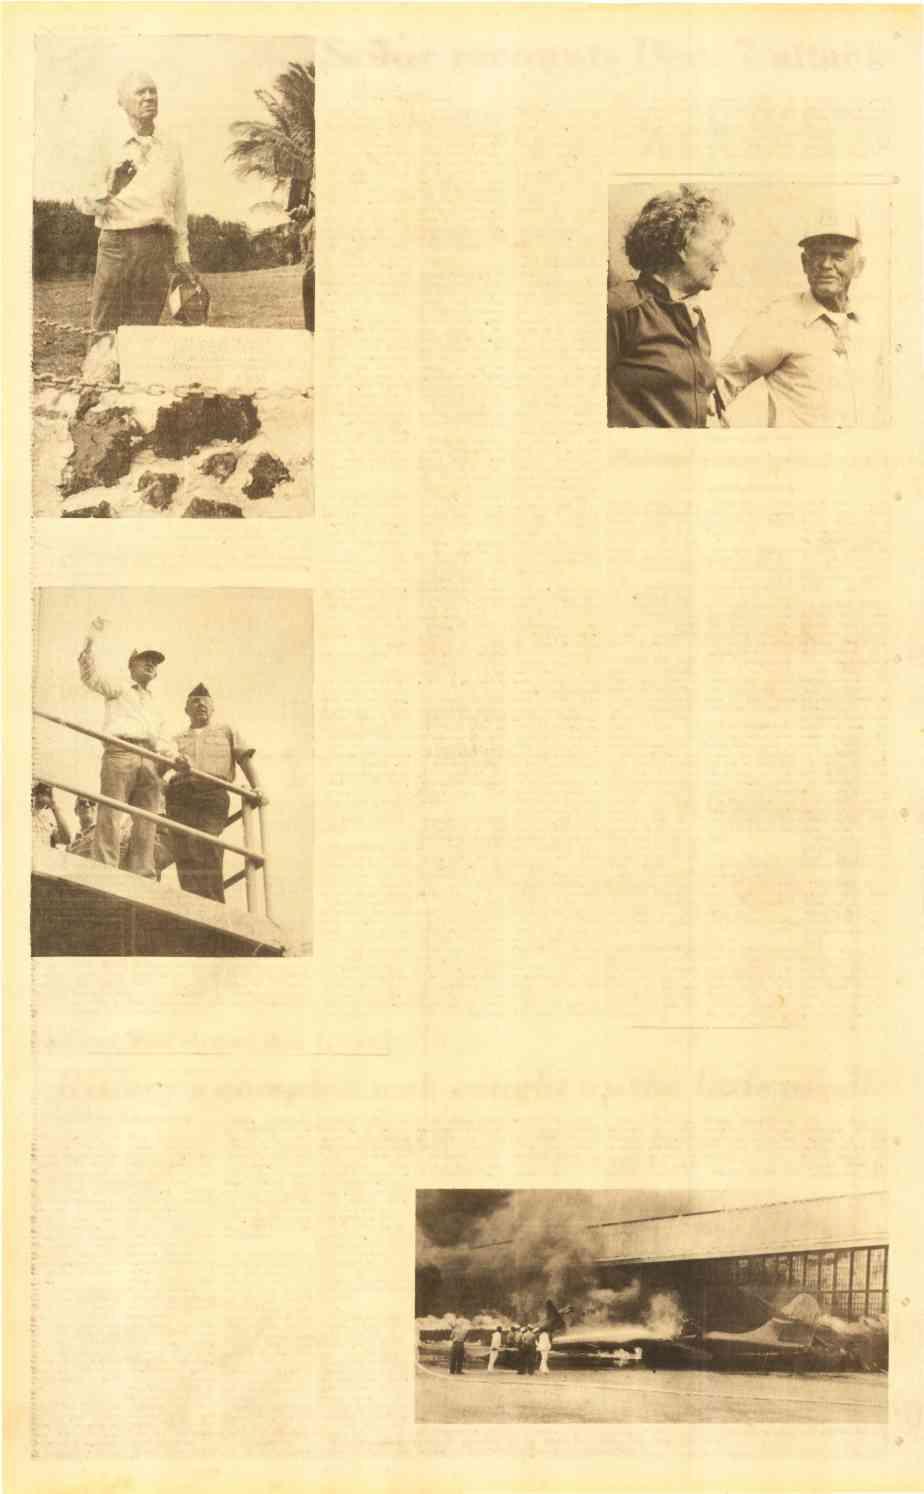 Page A-6, Dec 2-198t Sailor recounts Dec 7 attack A CLAM NEVER MADE - " never claimed that shot that plane down," said John Finn, recipient of themedal of Honor, "but if missed it should have been